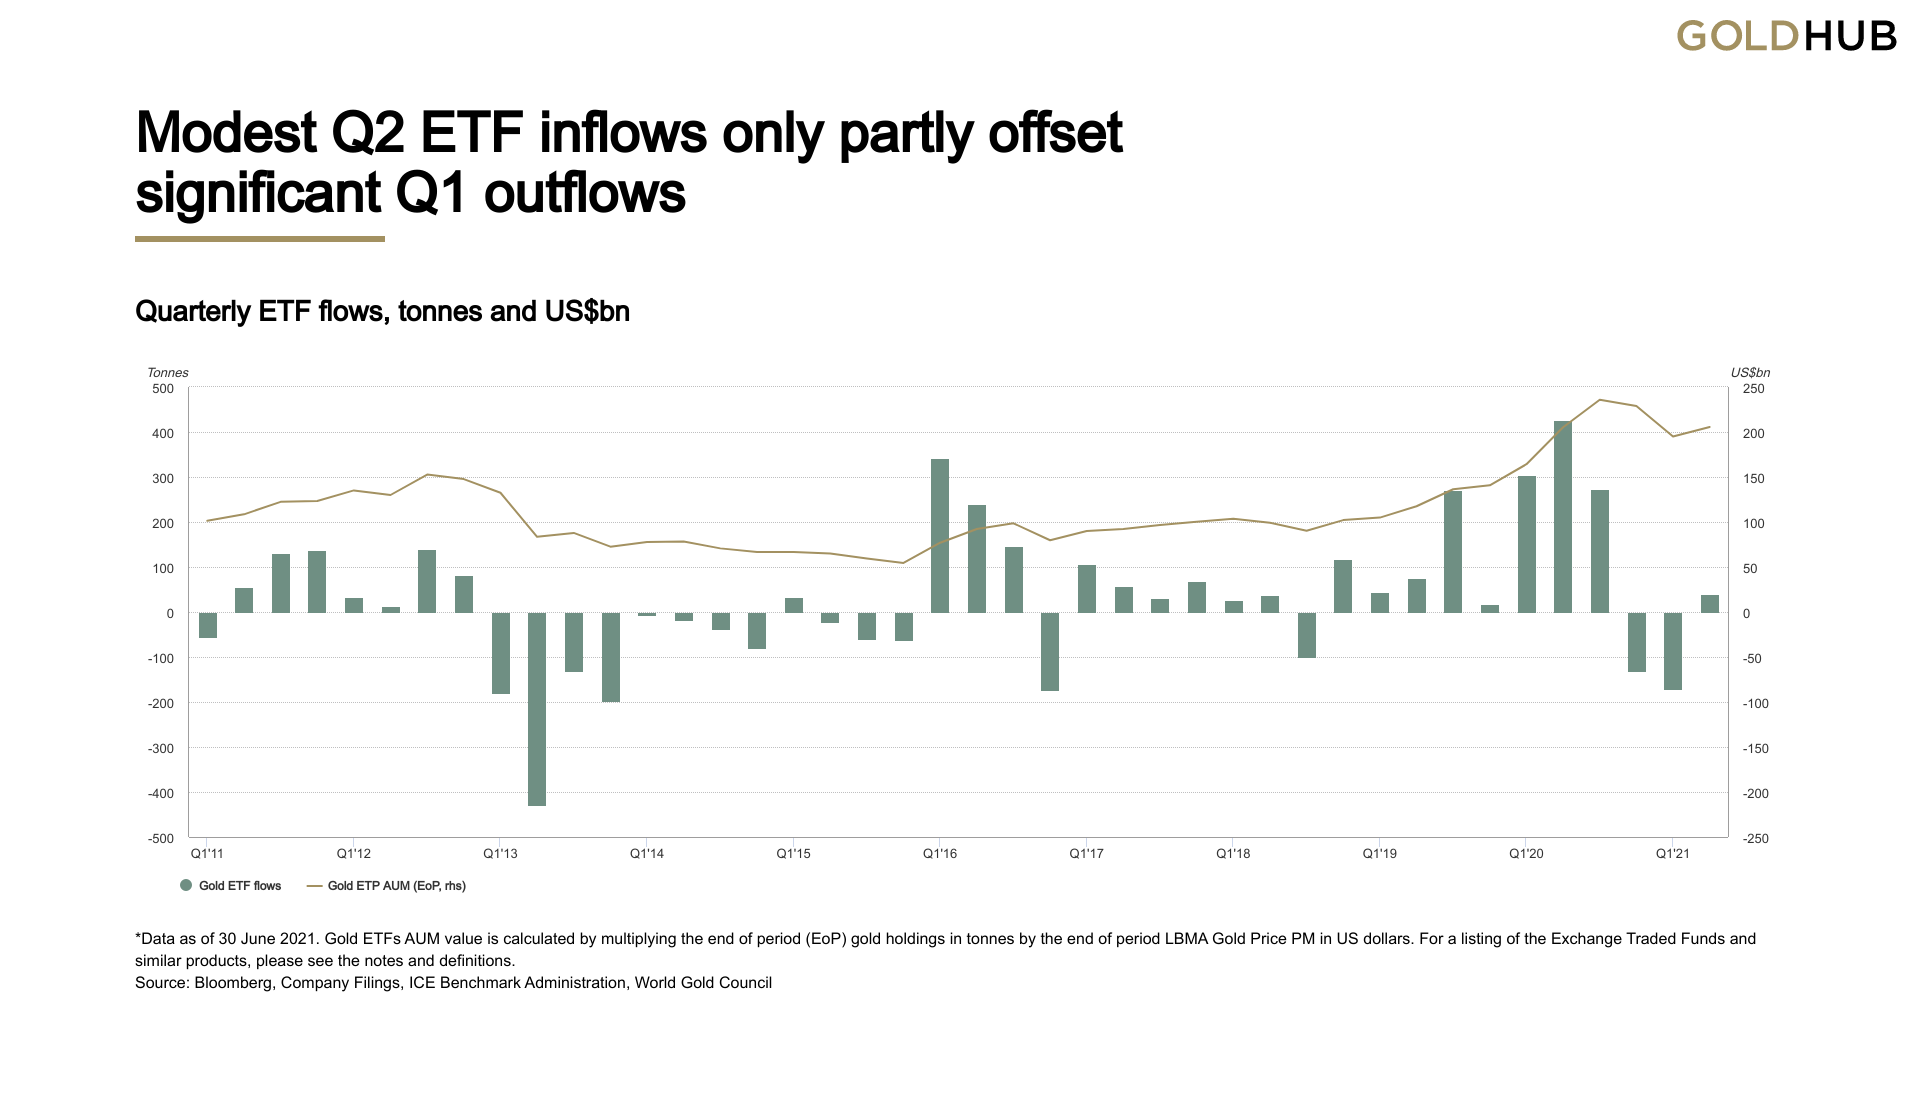 Modest Q2 ETF inflows only partly offset significant Q1 outflows